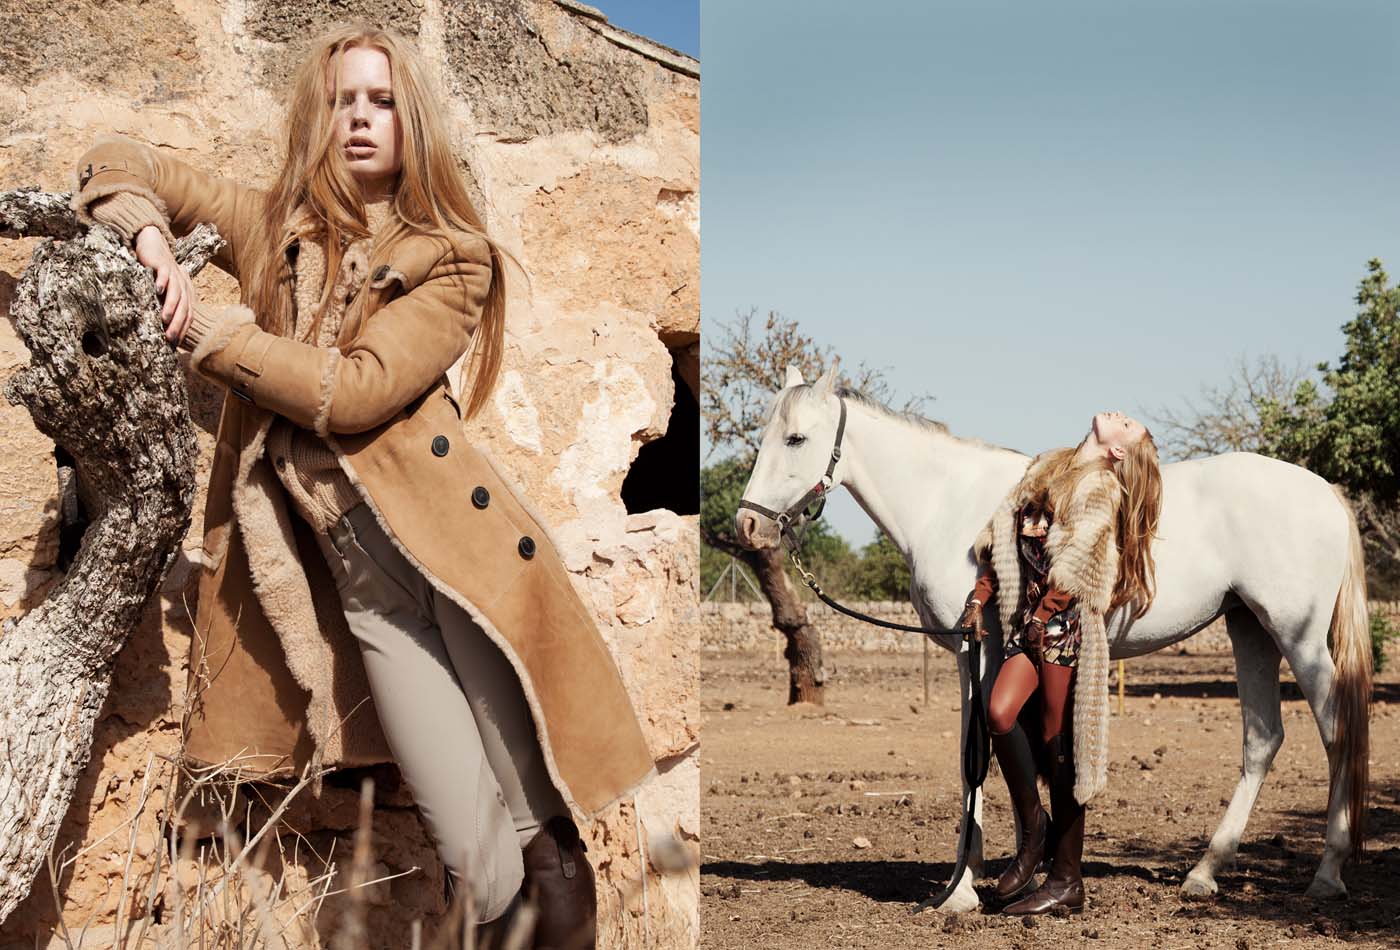 La Cavalière masquée | Andreas Ortner for Equistyle Magazine Winter 2011/2012: Into the wild